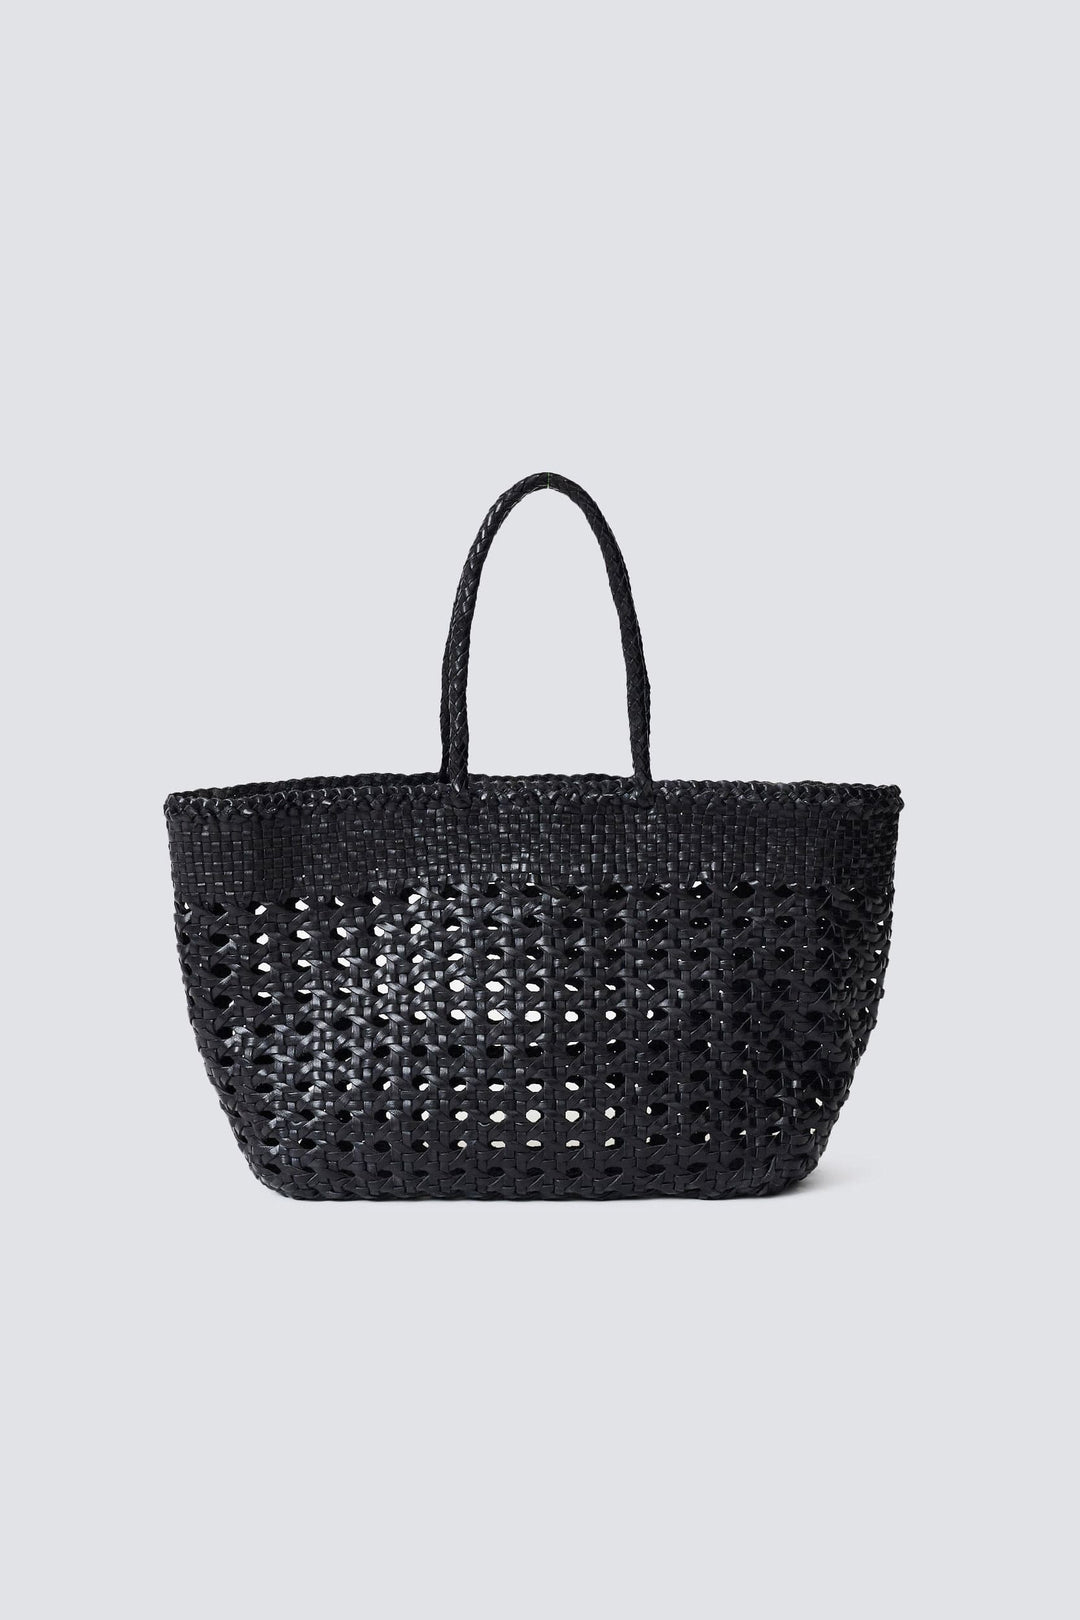 Dragon Diffusion woven leather bag handmade - Cannage Kanpur Black